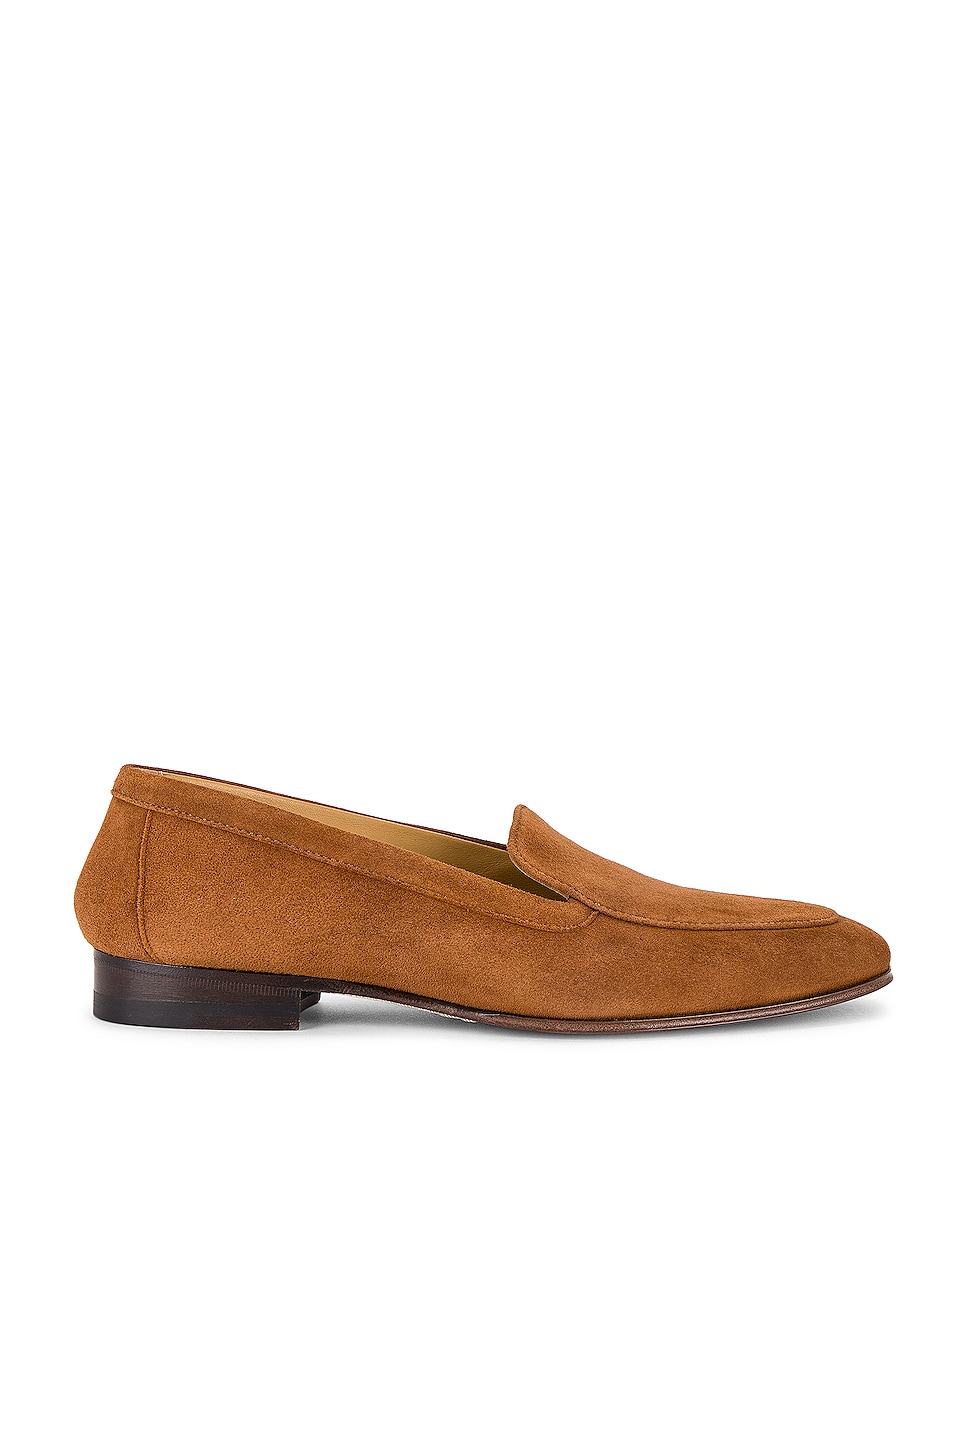 Image 1 of The Row Sophie Loafer in FAWN